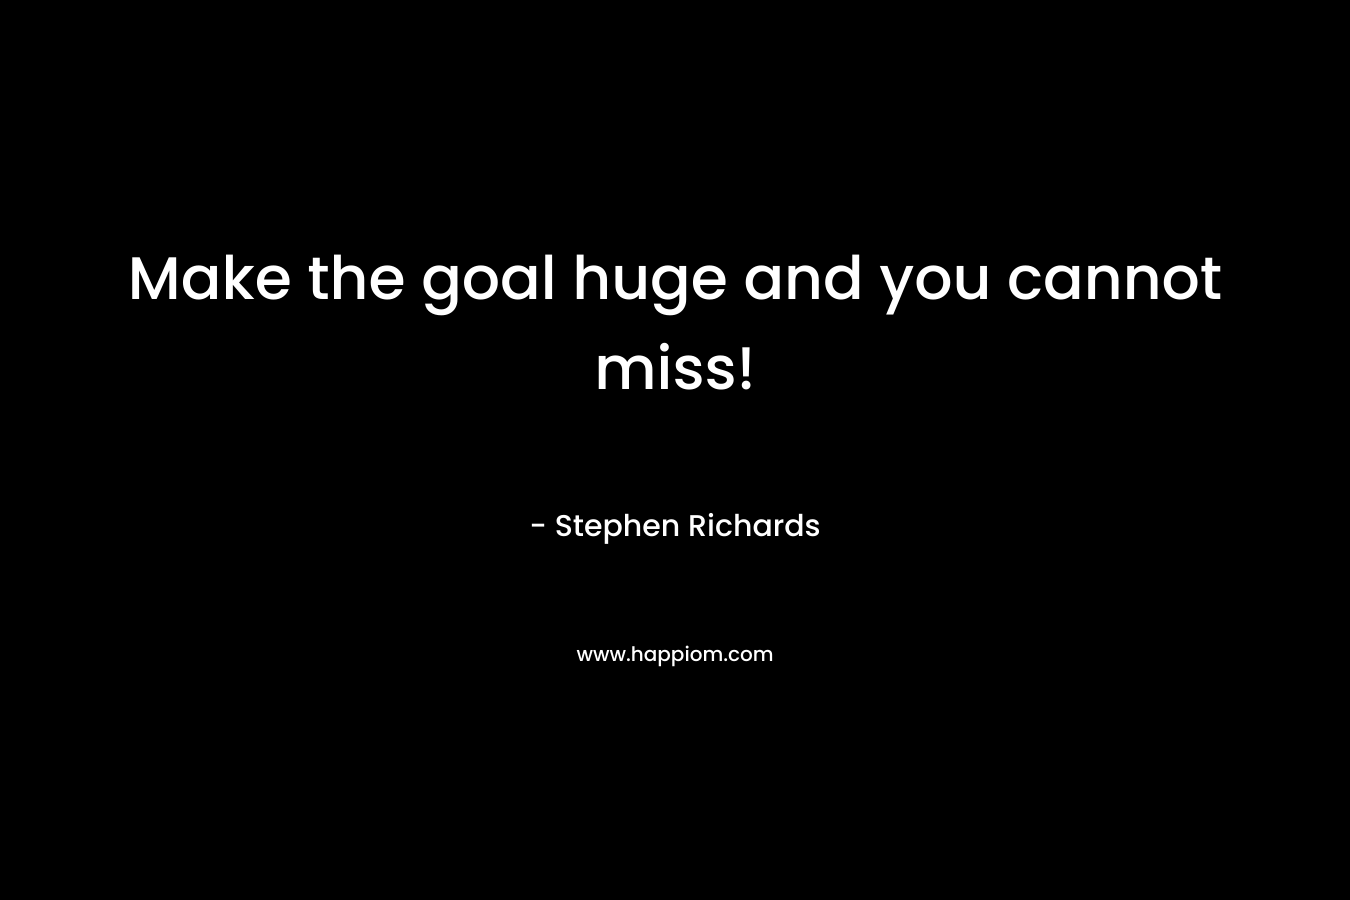 Make the goal huge and you cannot miss!